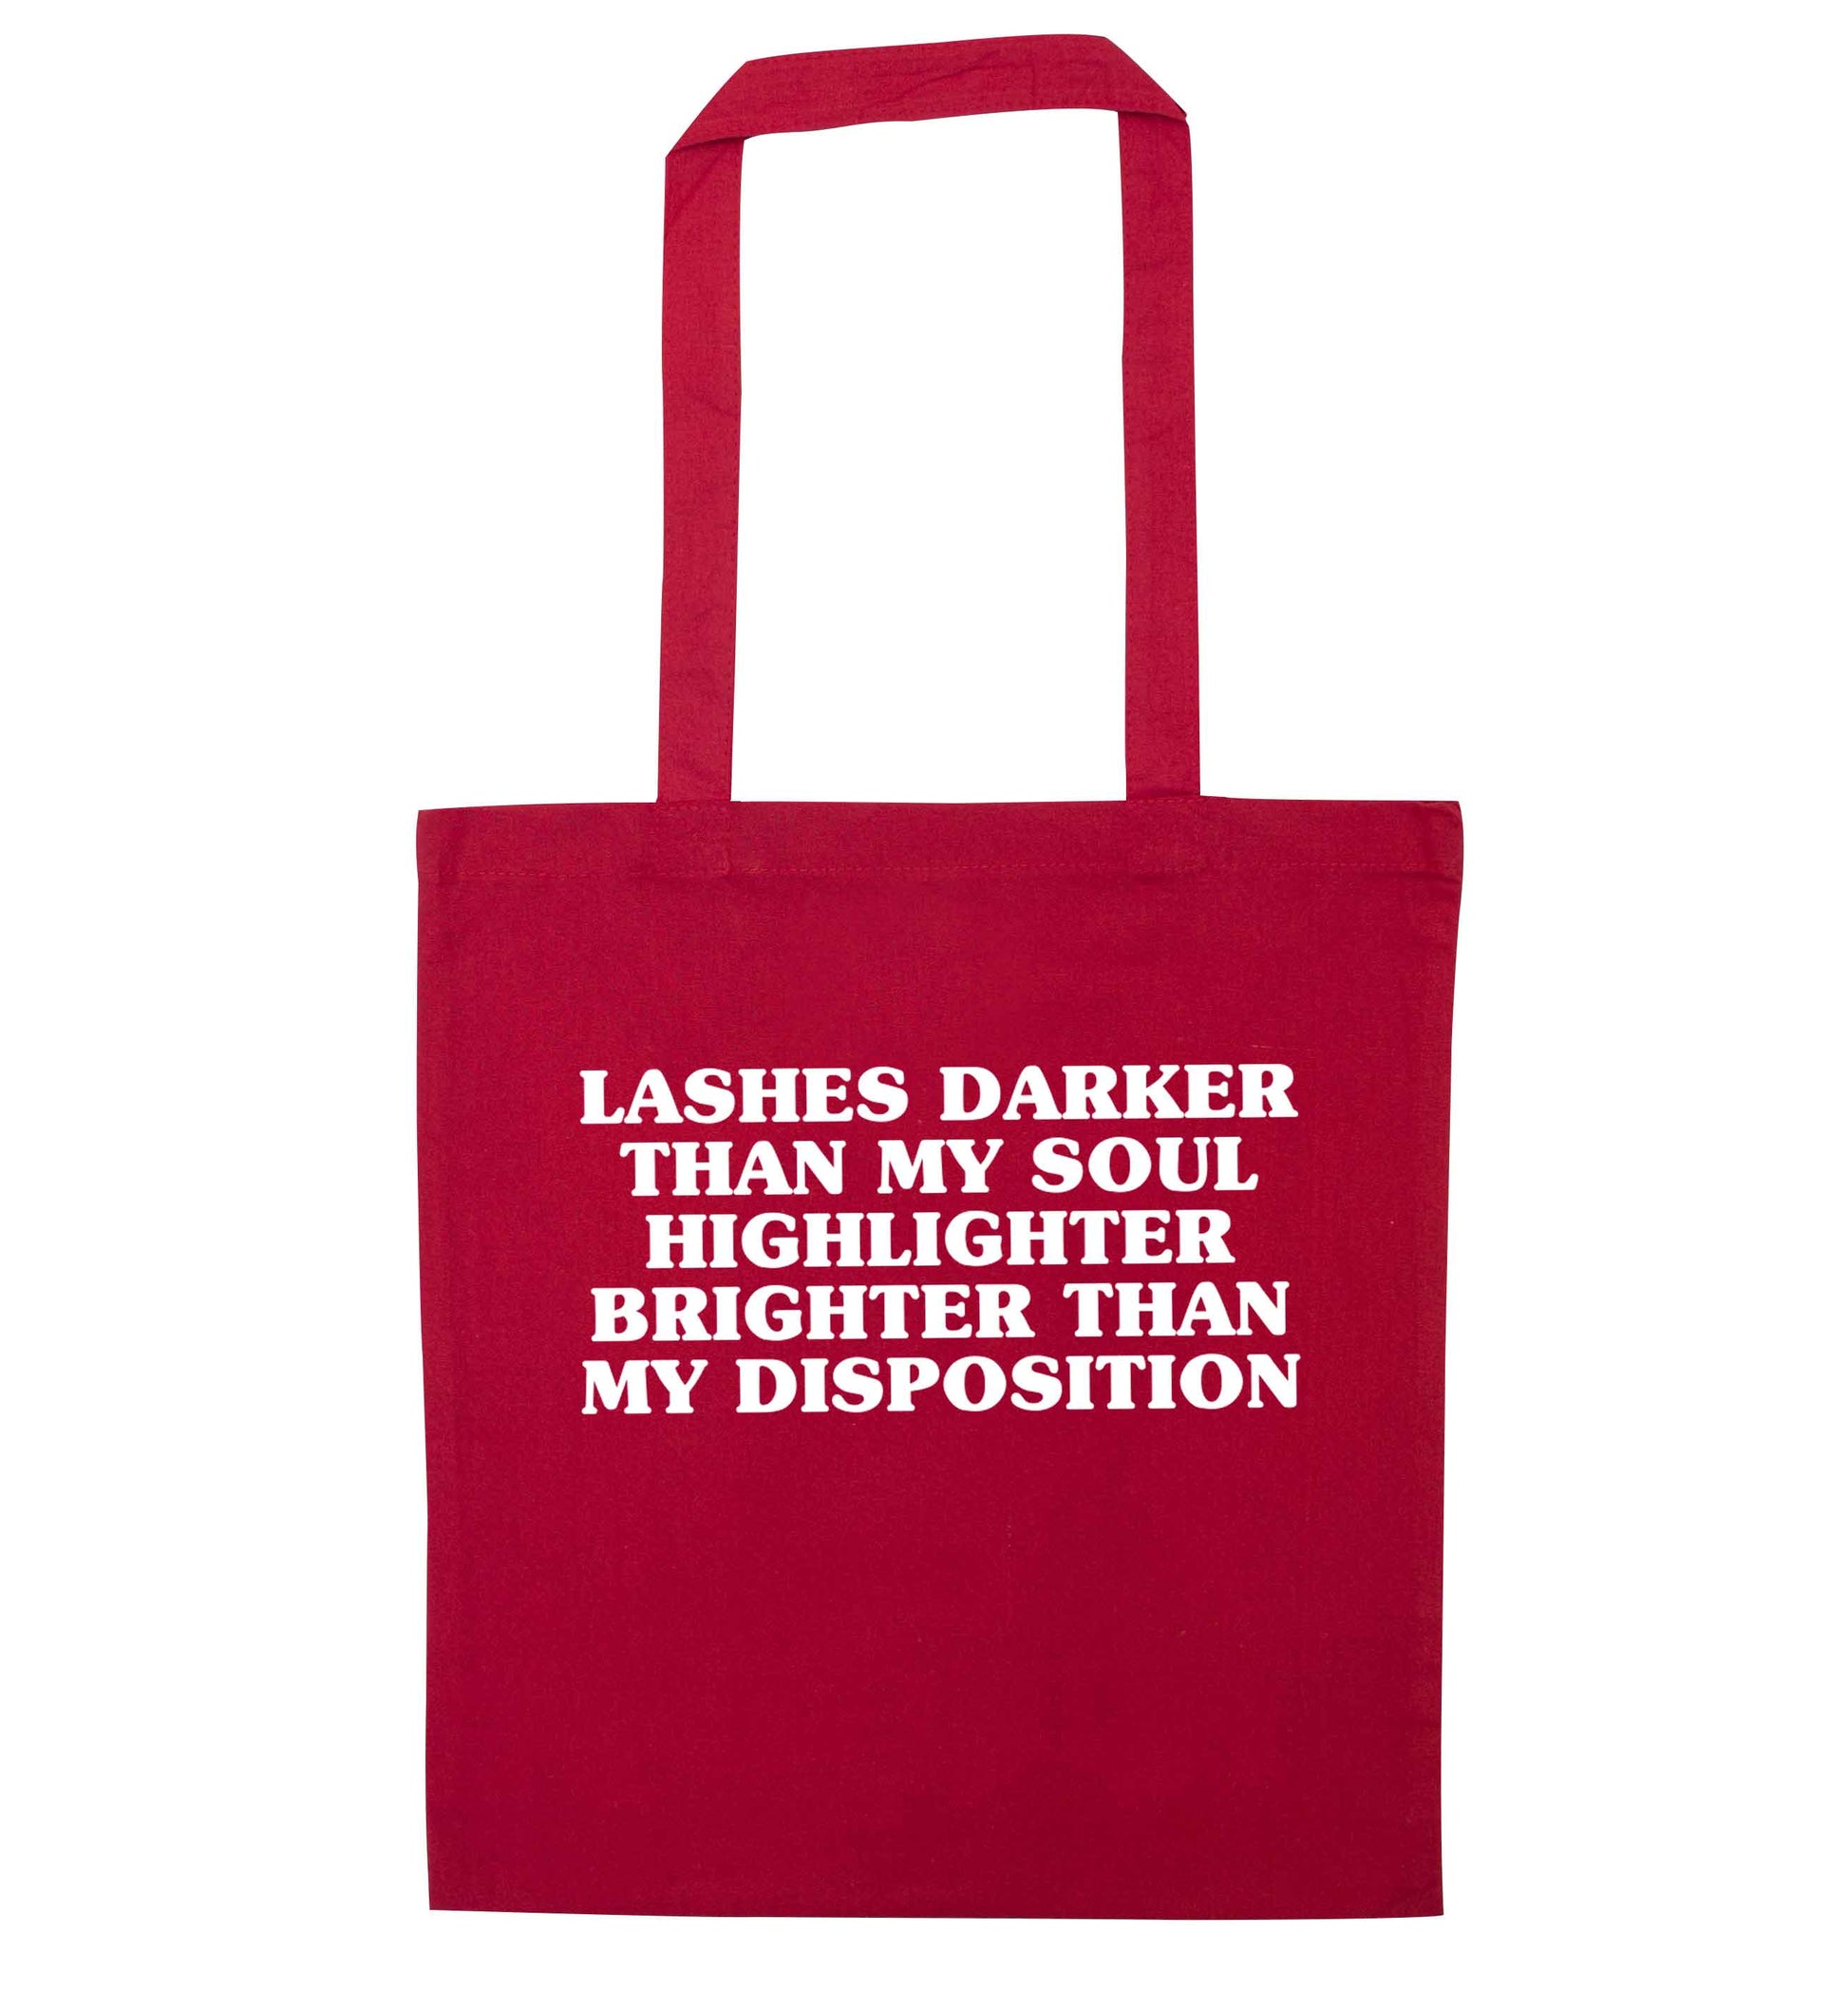 Lashes darker than my soul, highlighter brighter than my disposition red tote bag